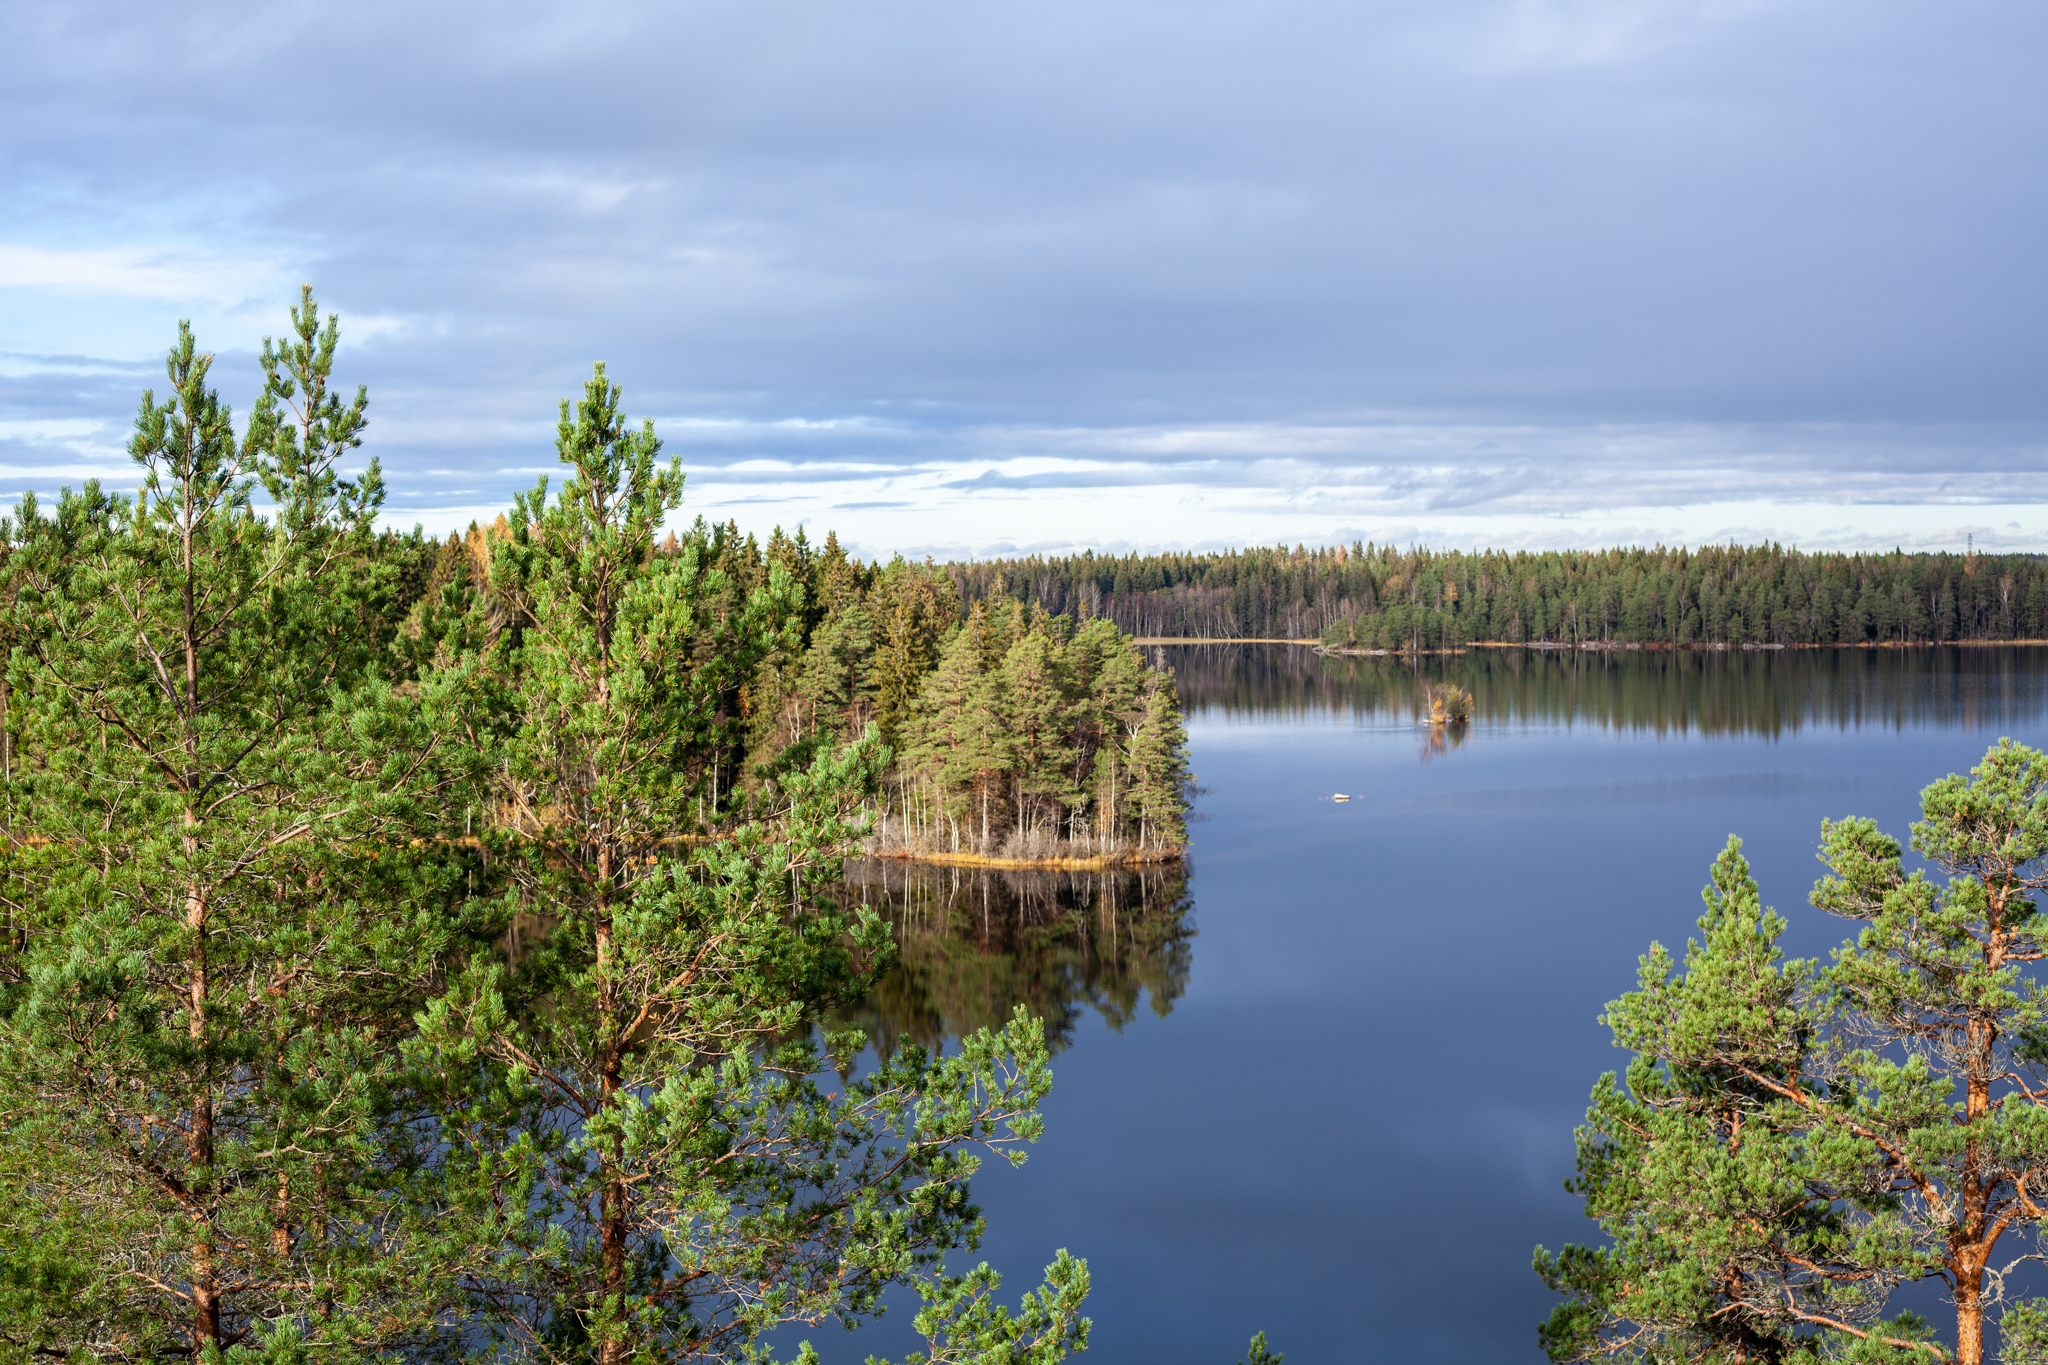 A picture of a Finnish lake landscape